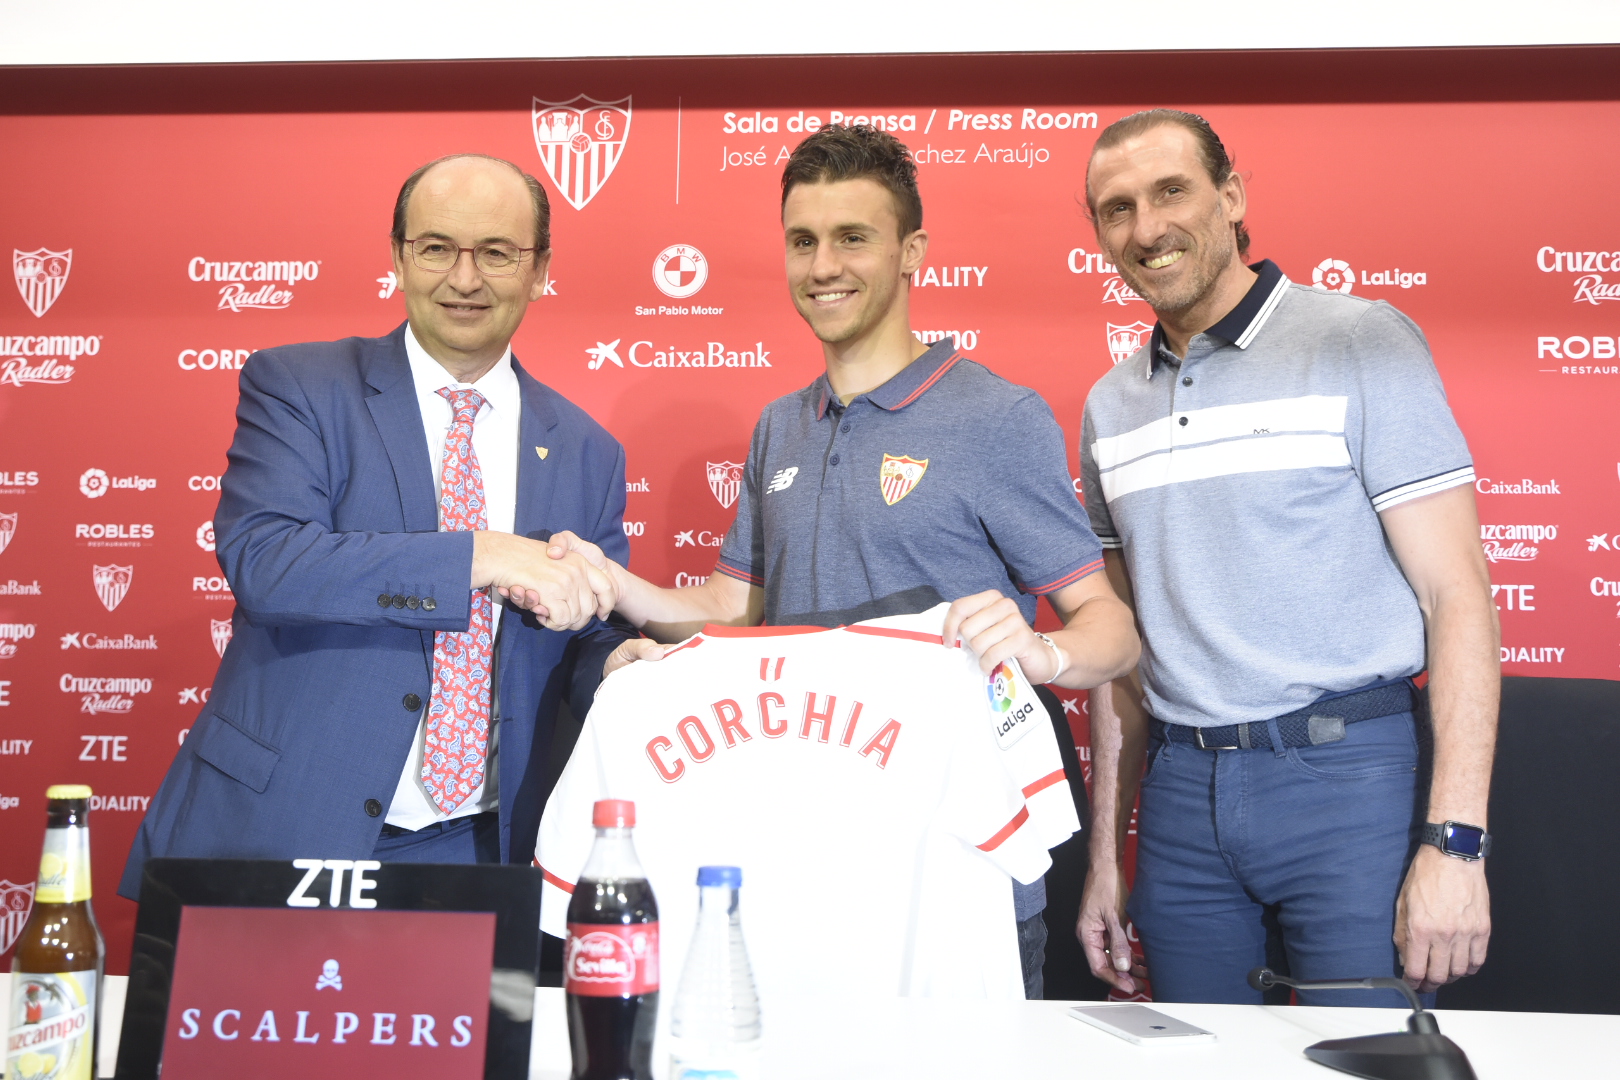 Corchia is presented as a new Sevilla FC player